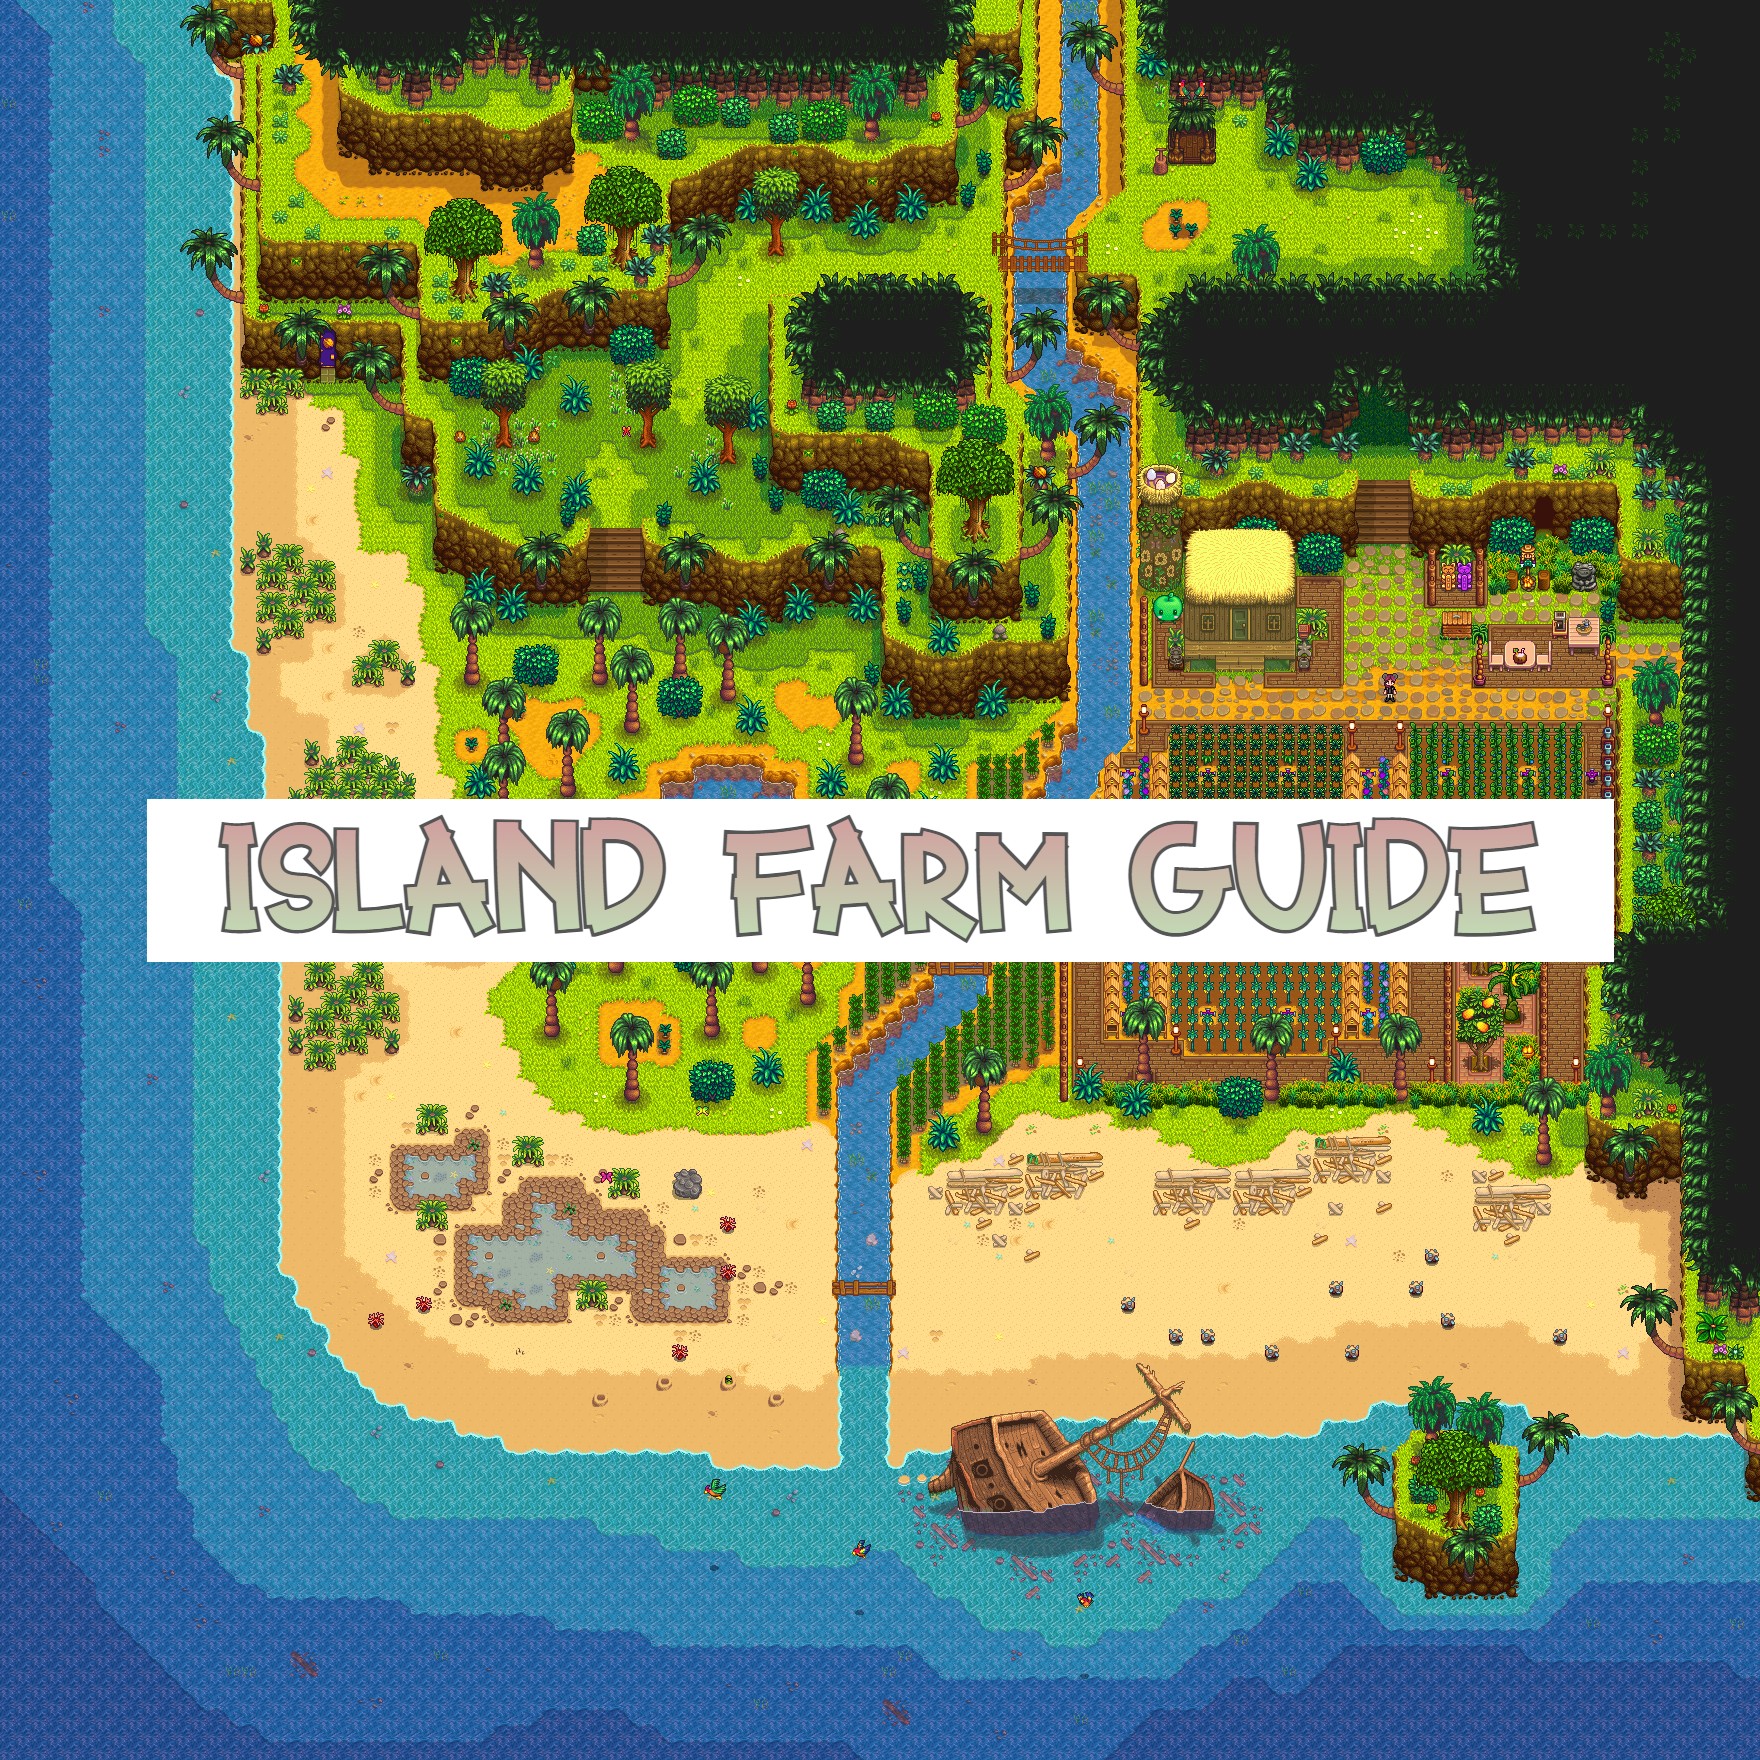 The Complete Island Farm Stardew Valley Guide